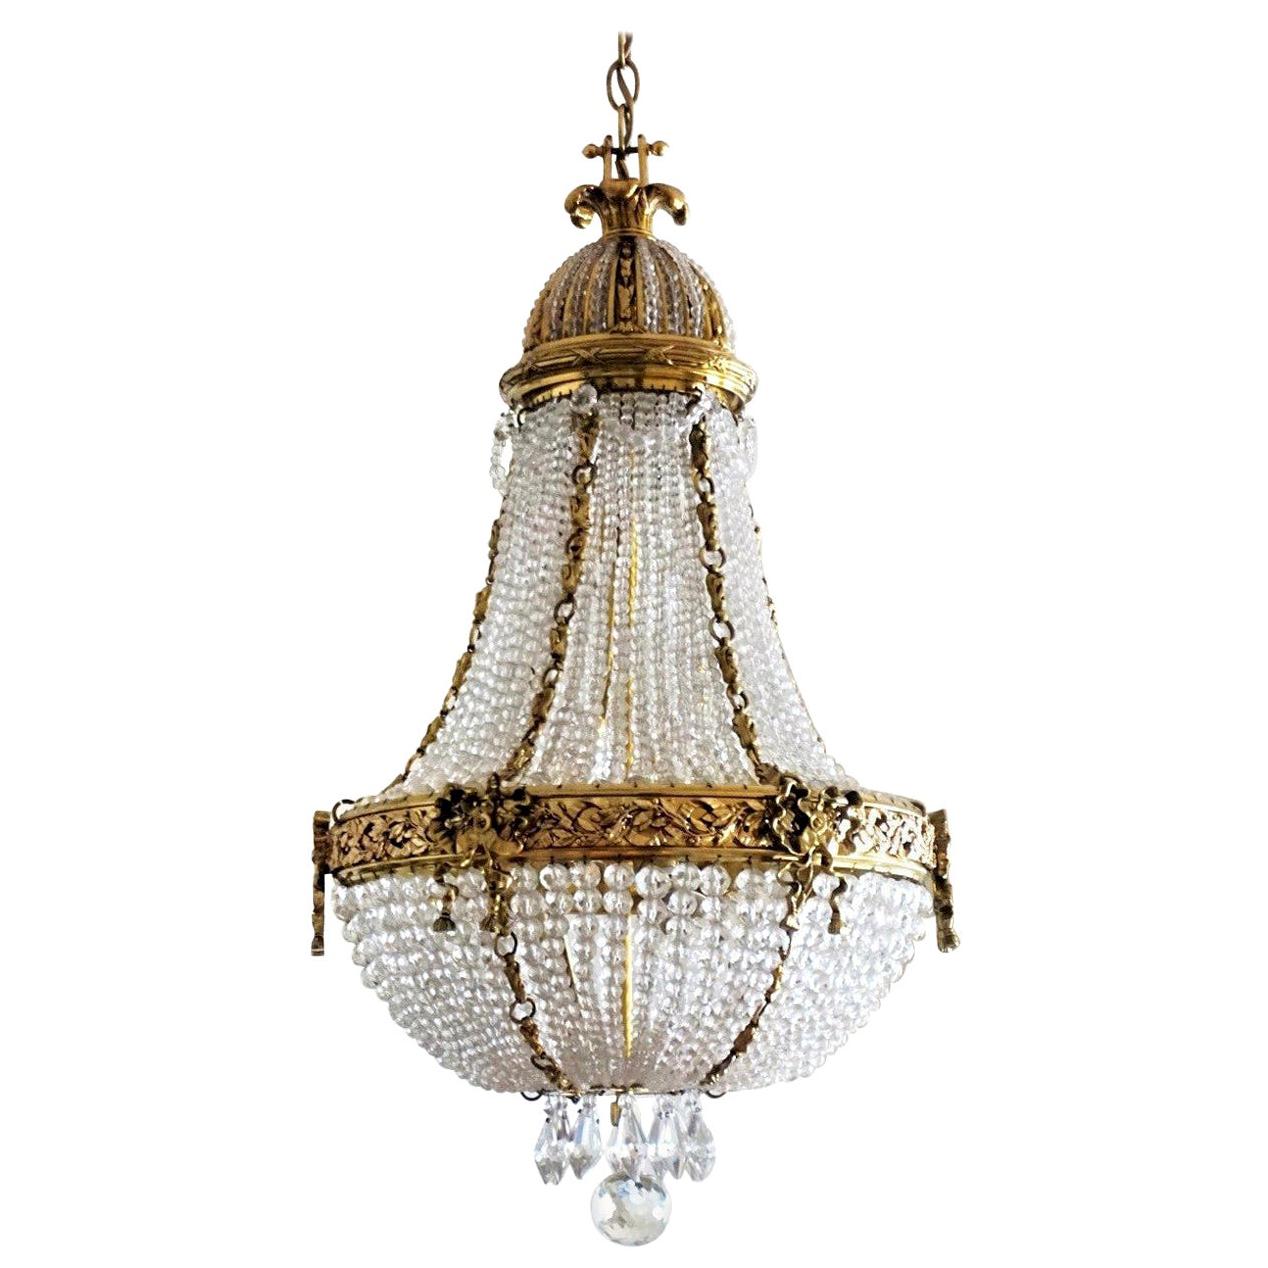 19th Century French Empire Gilt Bronze Beaded Crystal Chandelier 10